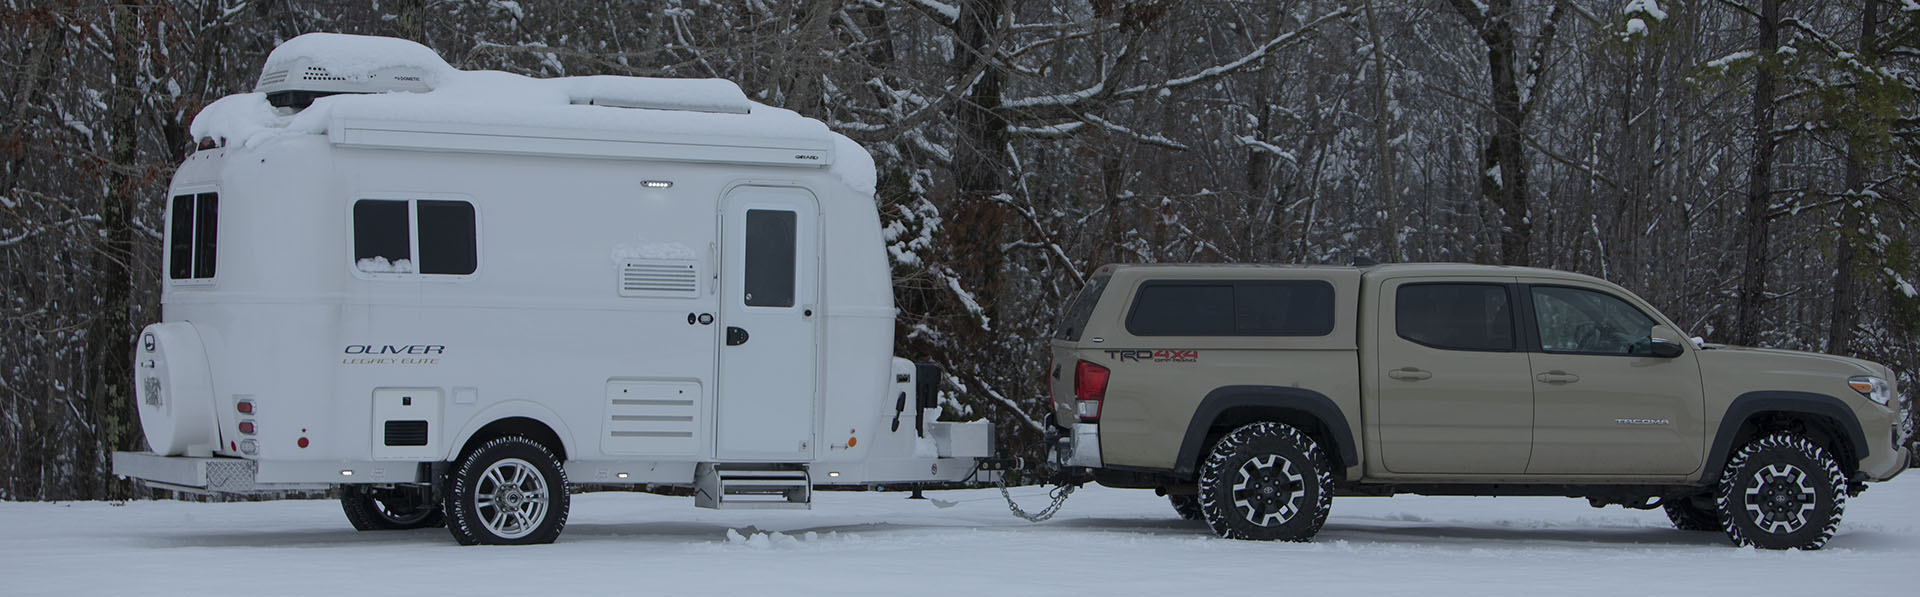 legacy elite small travel trailer in snow